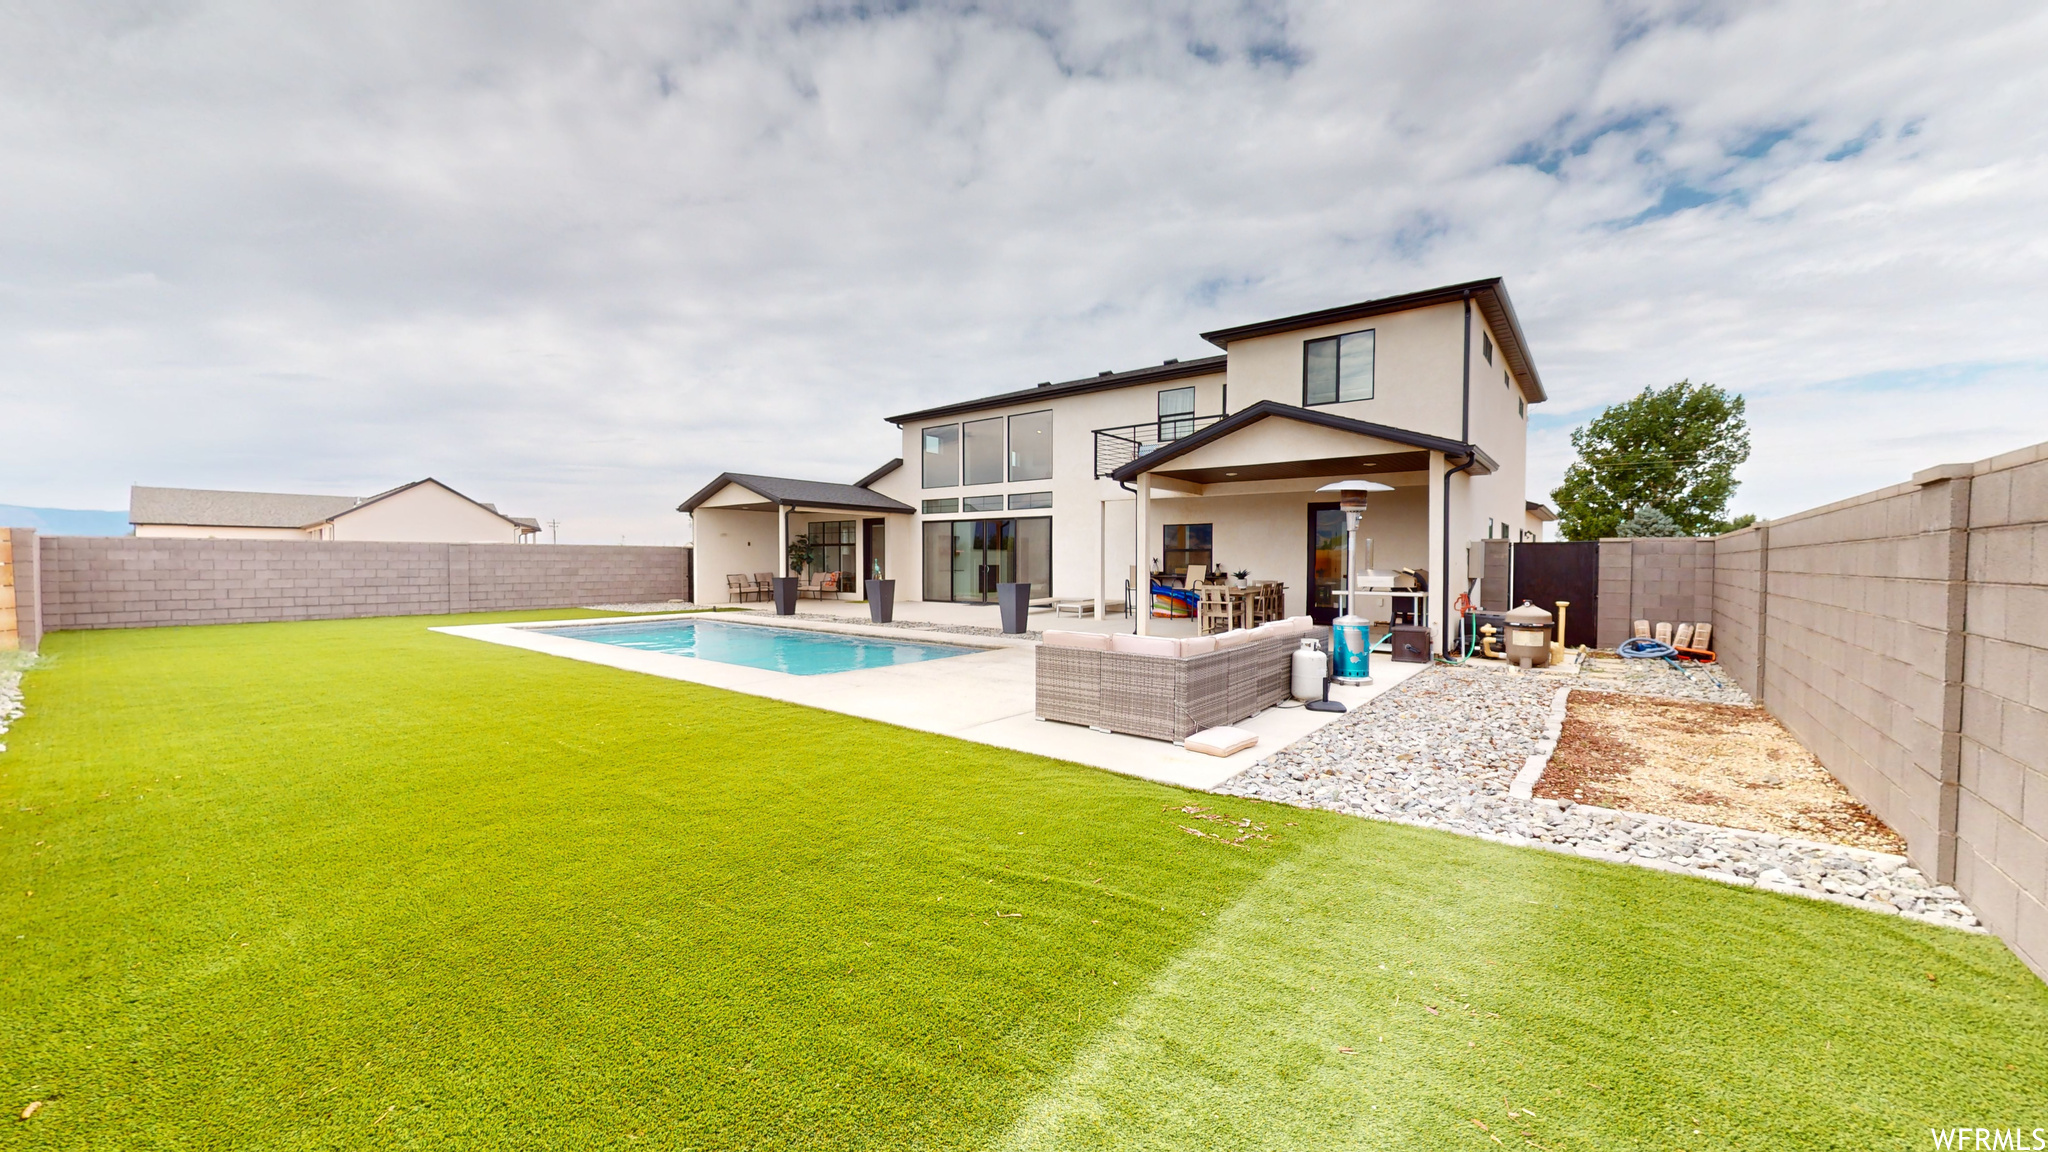 Rear view of house with an outdoor hangout area, a lawn, a fenced in pool, and a patio